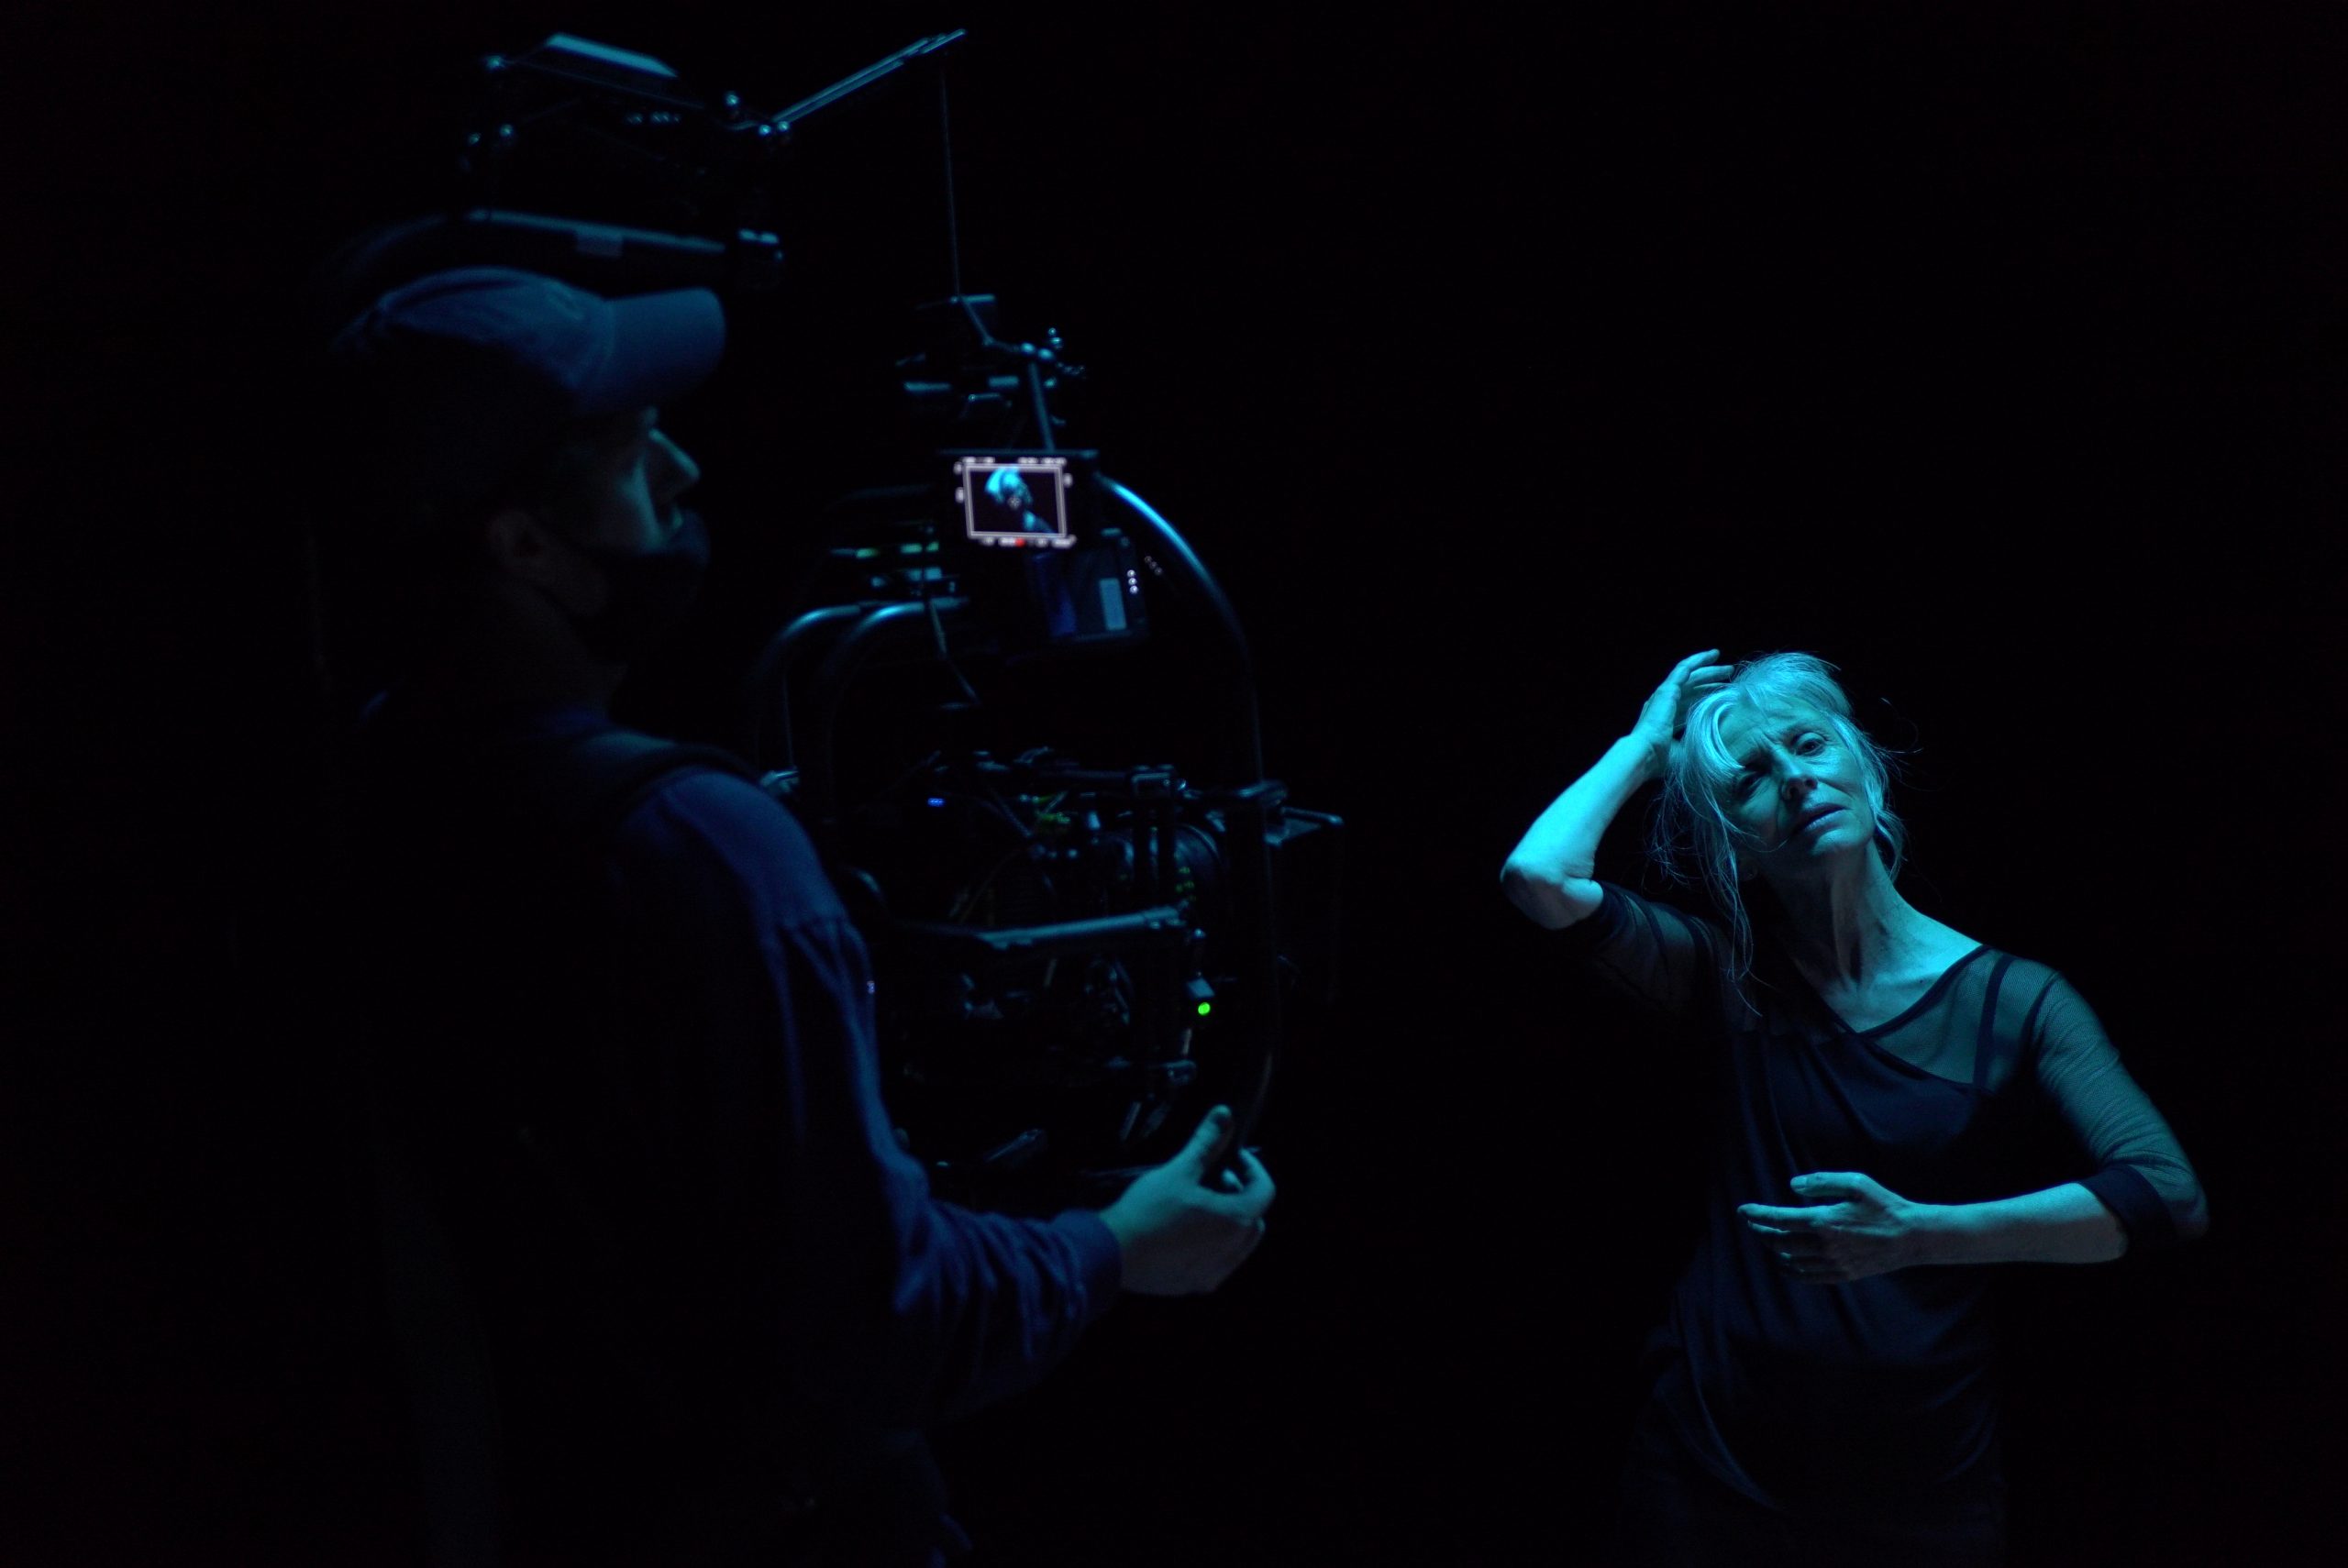 A man and a woman filming in the dark with camera equipment near by while standing next to one another